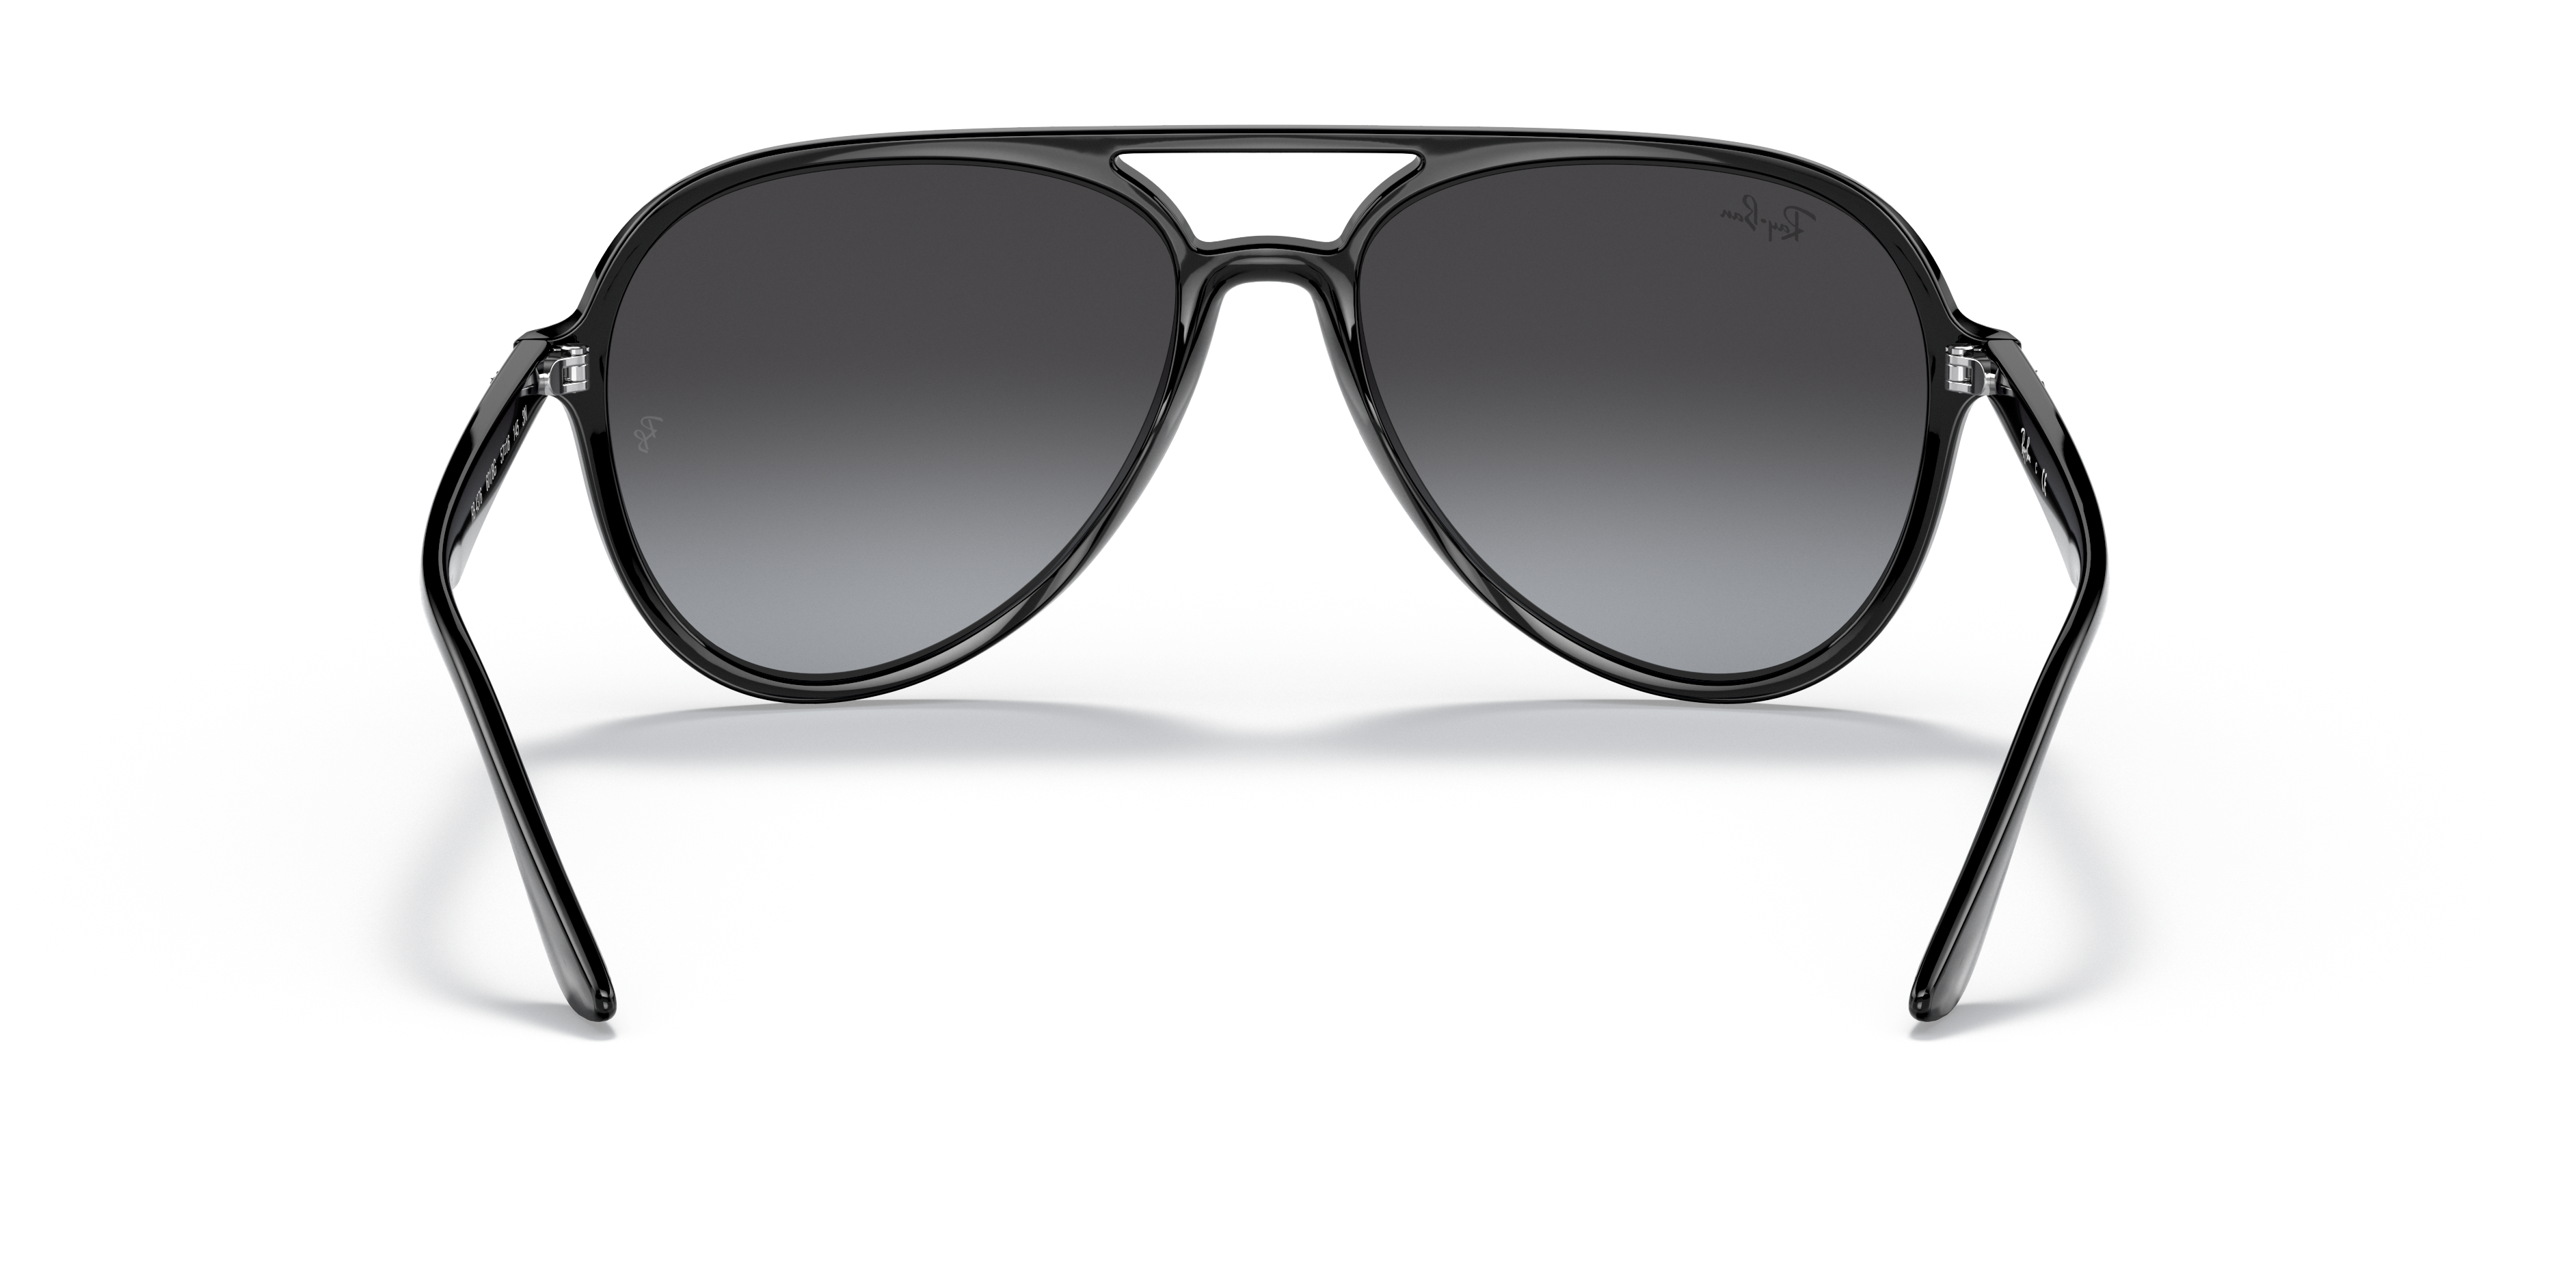 Rb4376 Sunglasses in Black and Grey | Ray-Ban®